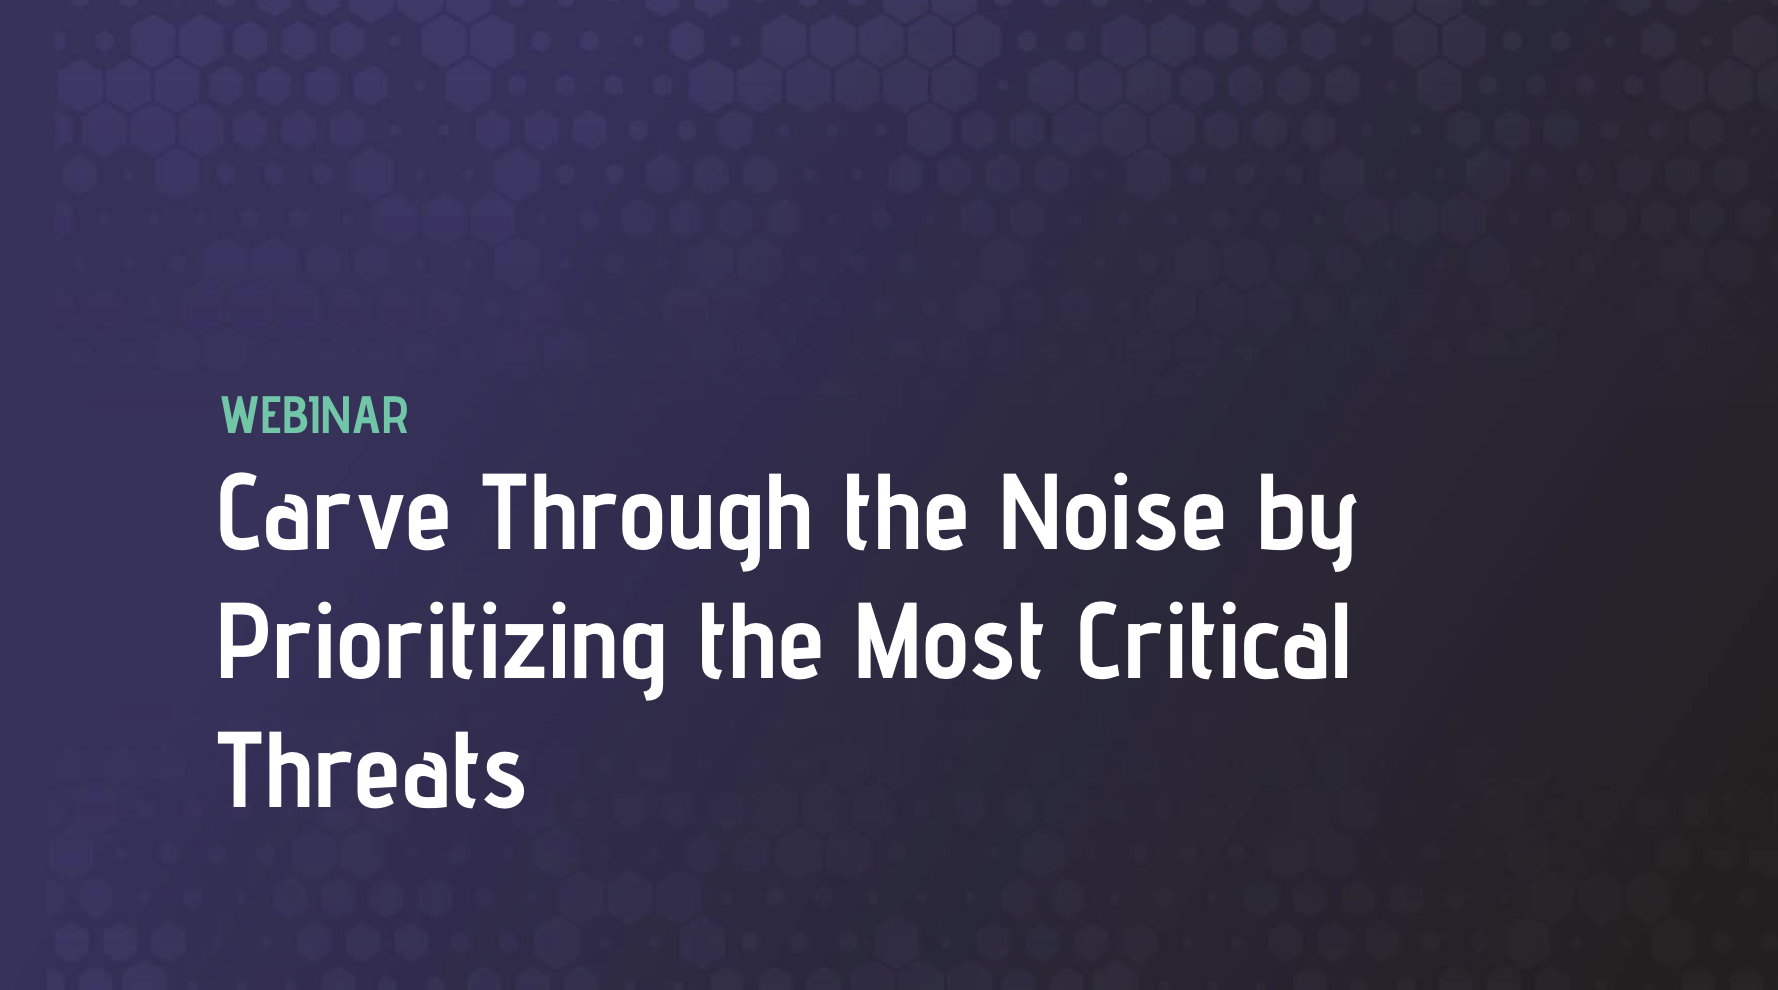 Carve Through the Noise by Prioritizing the Most Critical Threats